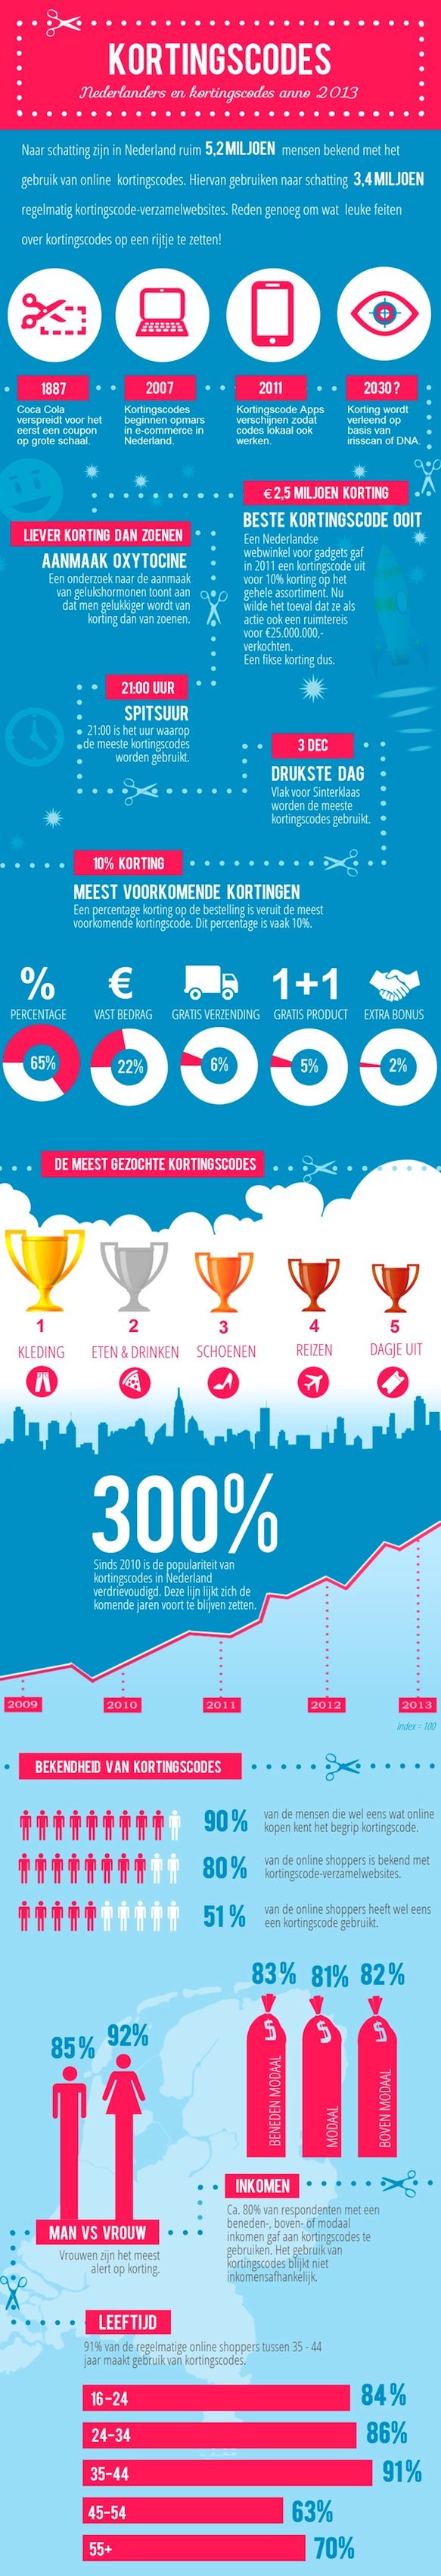 Kortingscodes-anno-2013-infographic